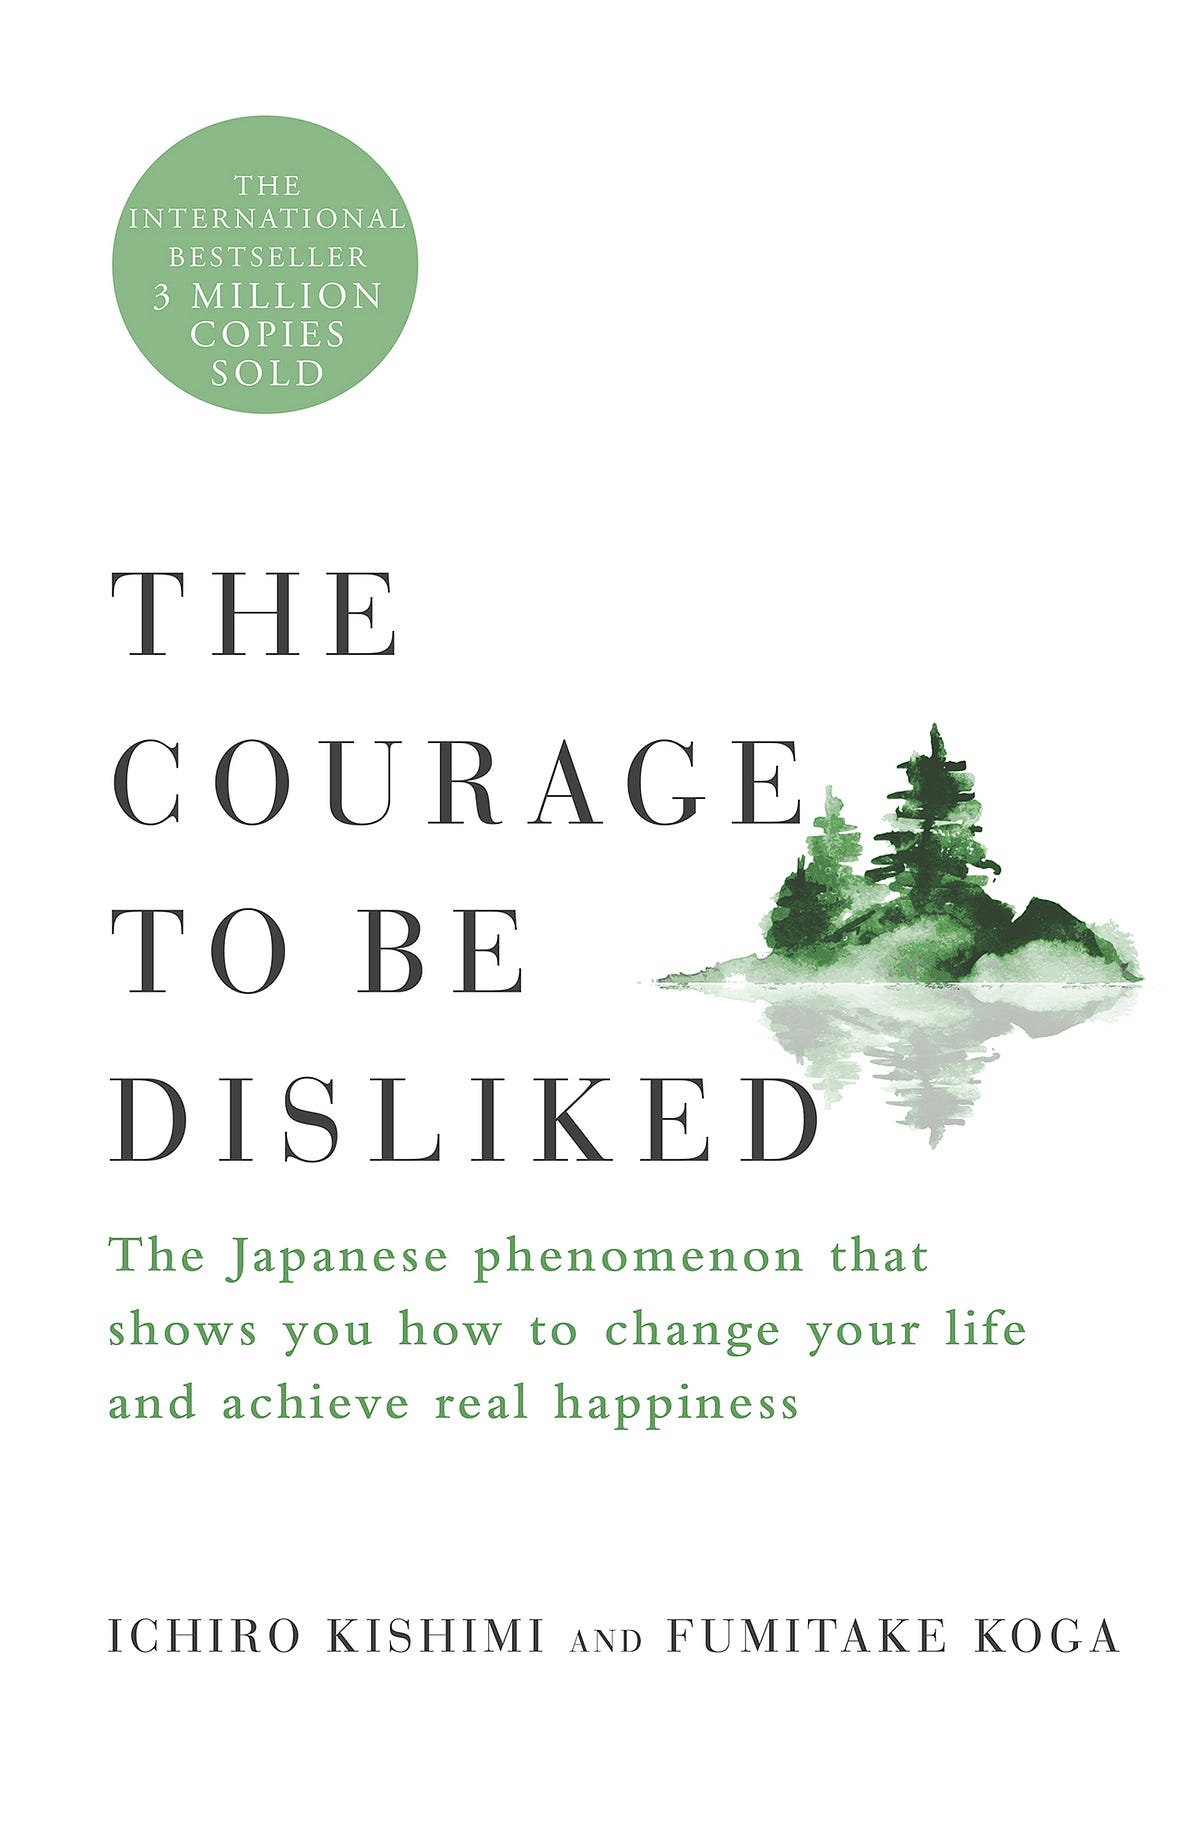 this is a cover of a book. Its title is The courage to be disliked. Very Japanese!